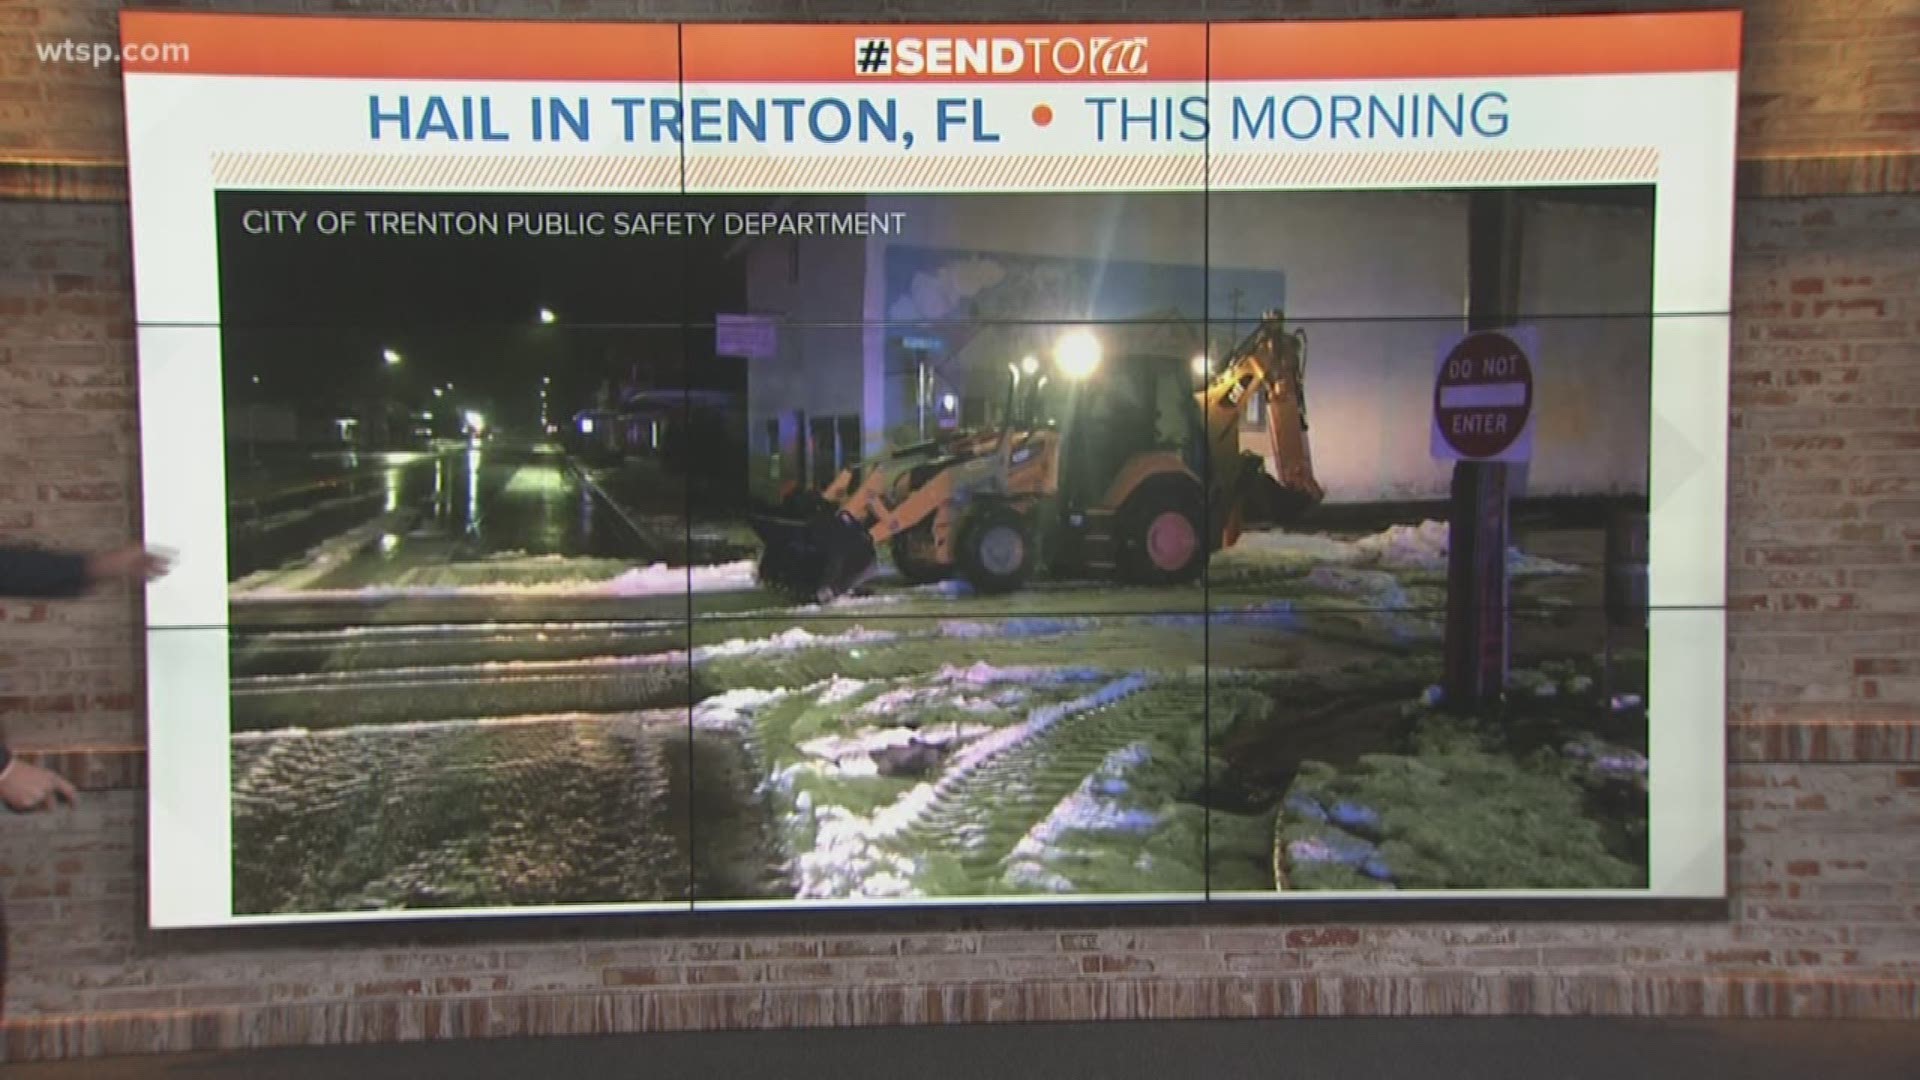 The city of Trenton Public Safety Department is warning drivers of ice on the roadways. A Facebook post says the ice is from hail on Tuesday morning.